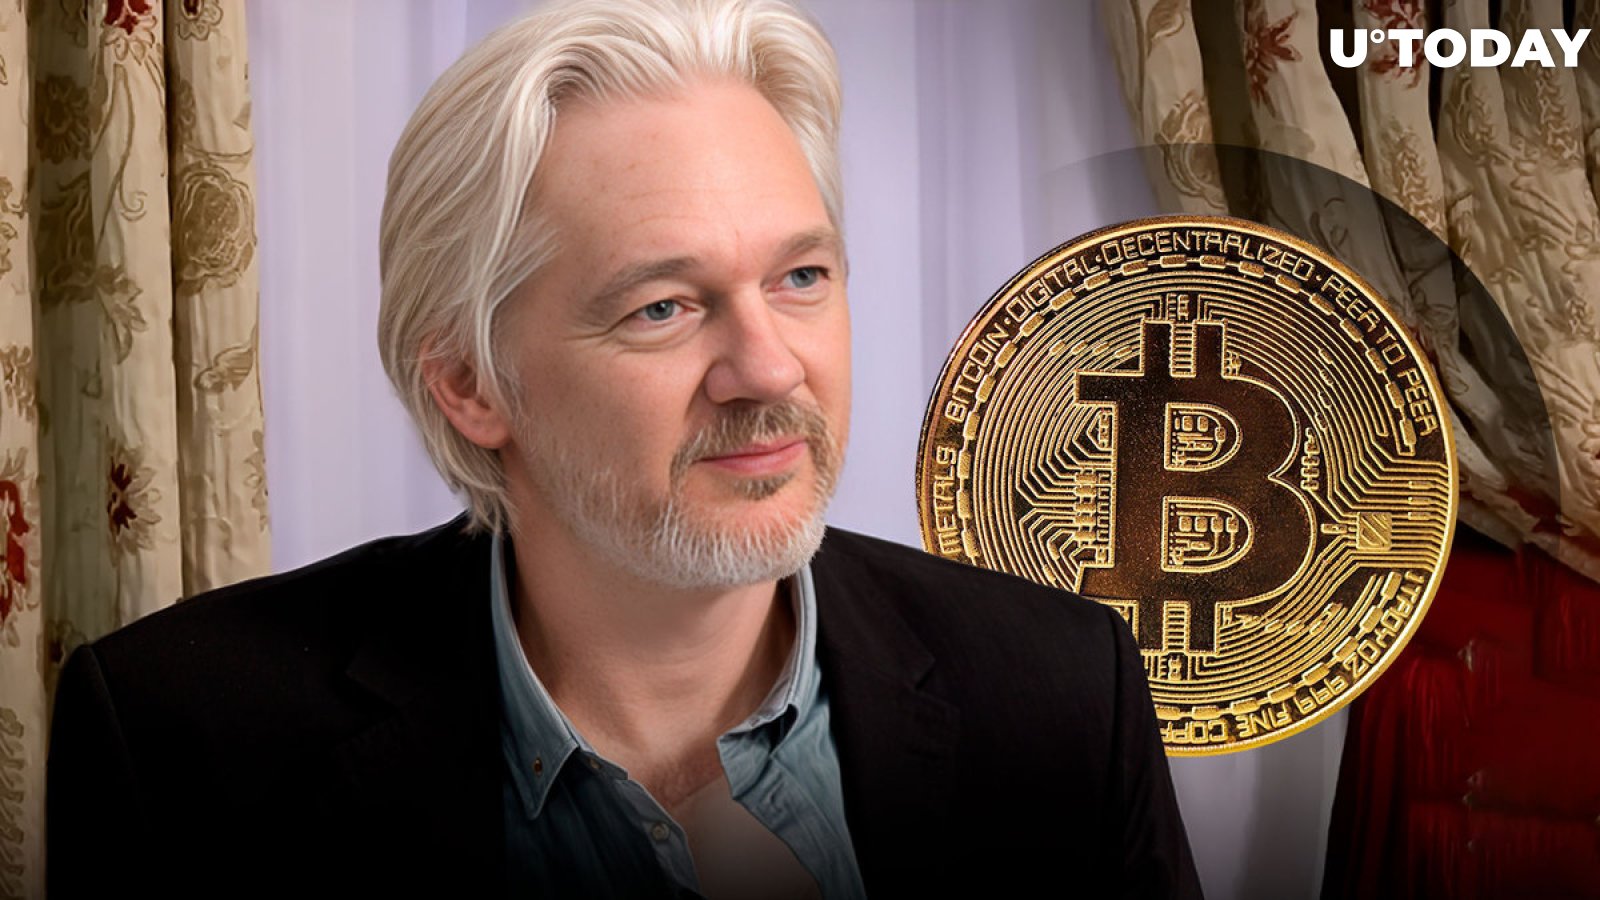 WikiLeaks Founder Julian Assange Received Enormous $500,000 Donation From Bitcoin Whale